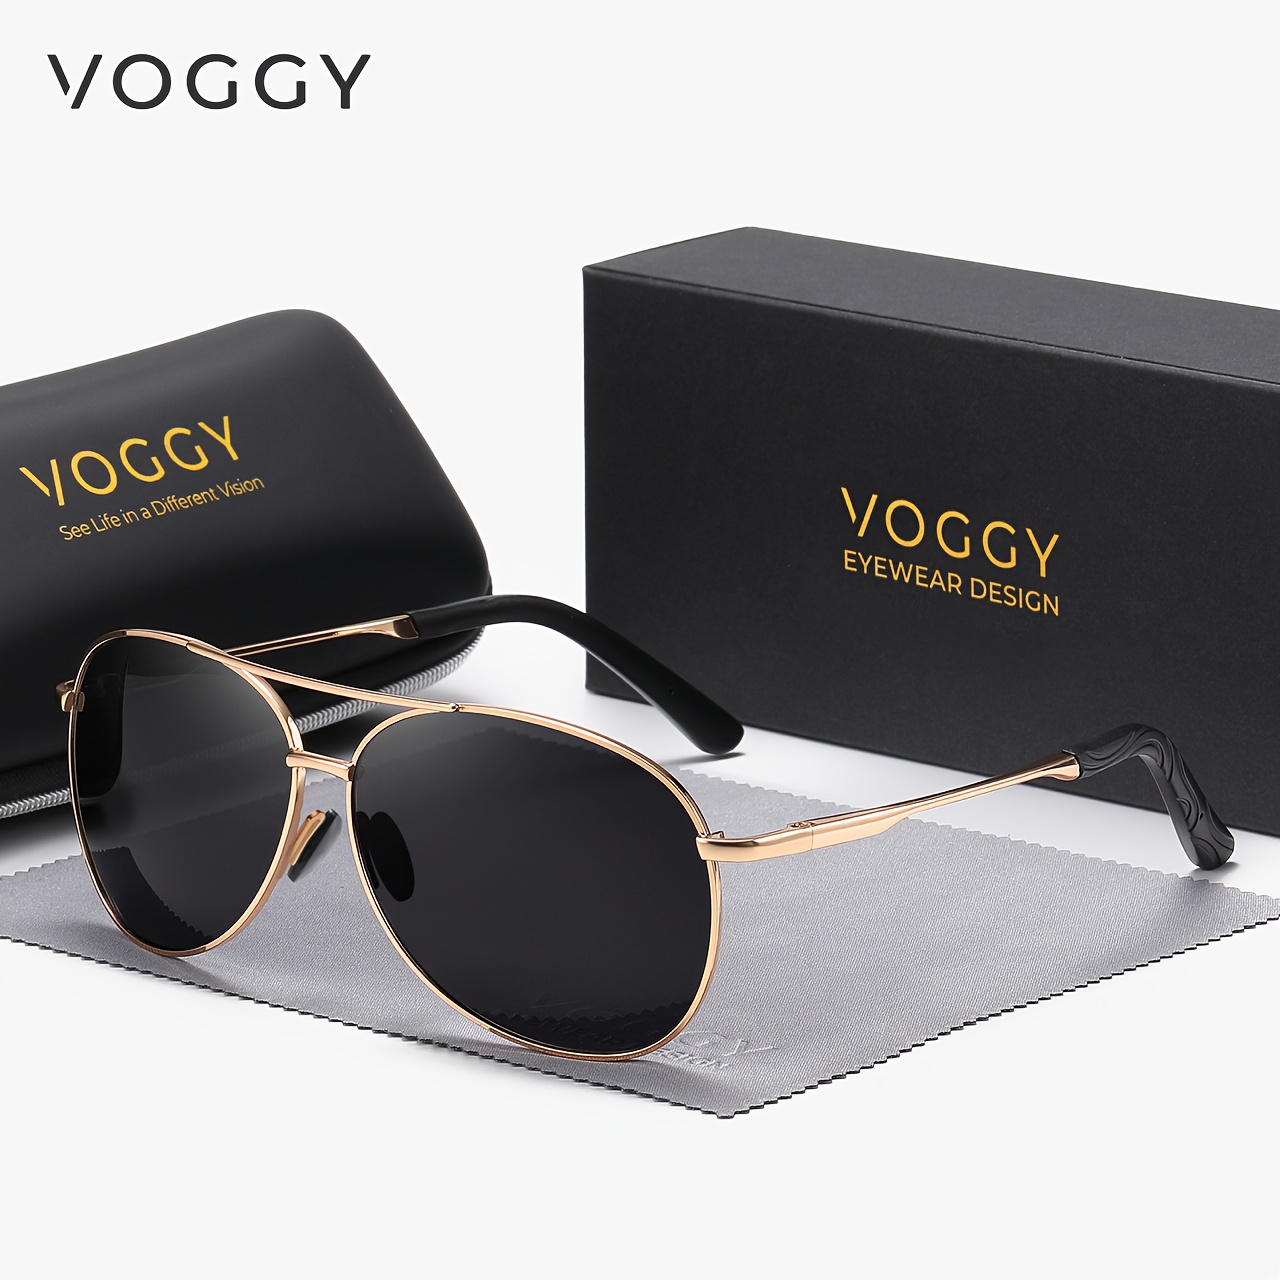 

Voggy Polarized Sunglasses For Women Men Vintage Mirrored Fashion Sun Shades For Driving Beach Travel With Gifts Box Mother's Day